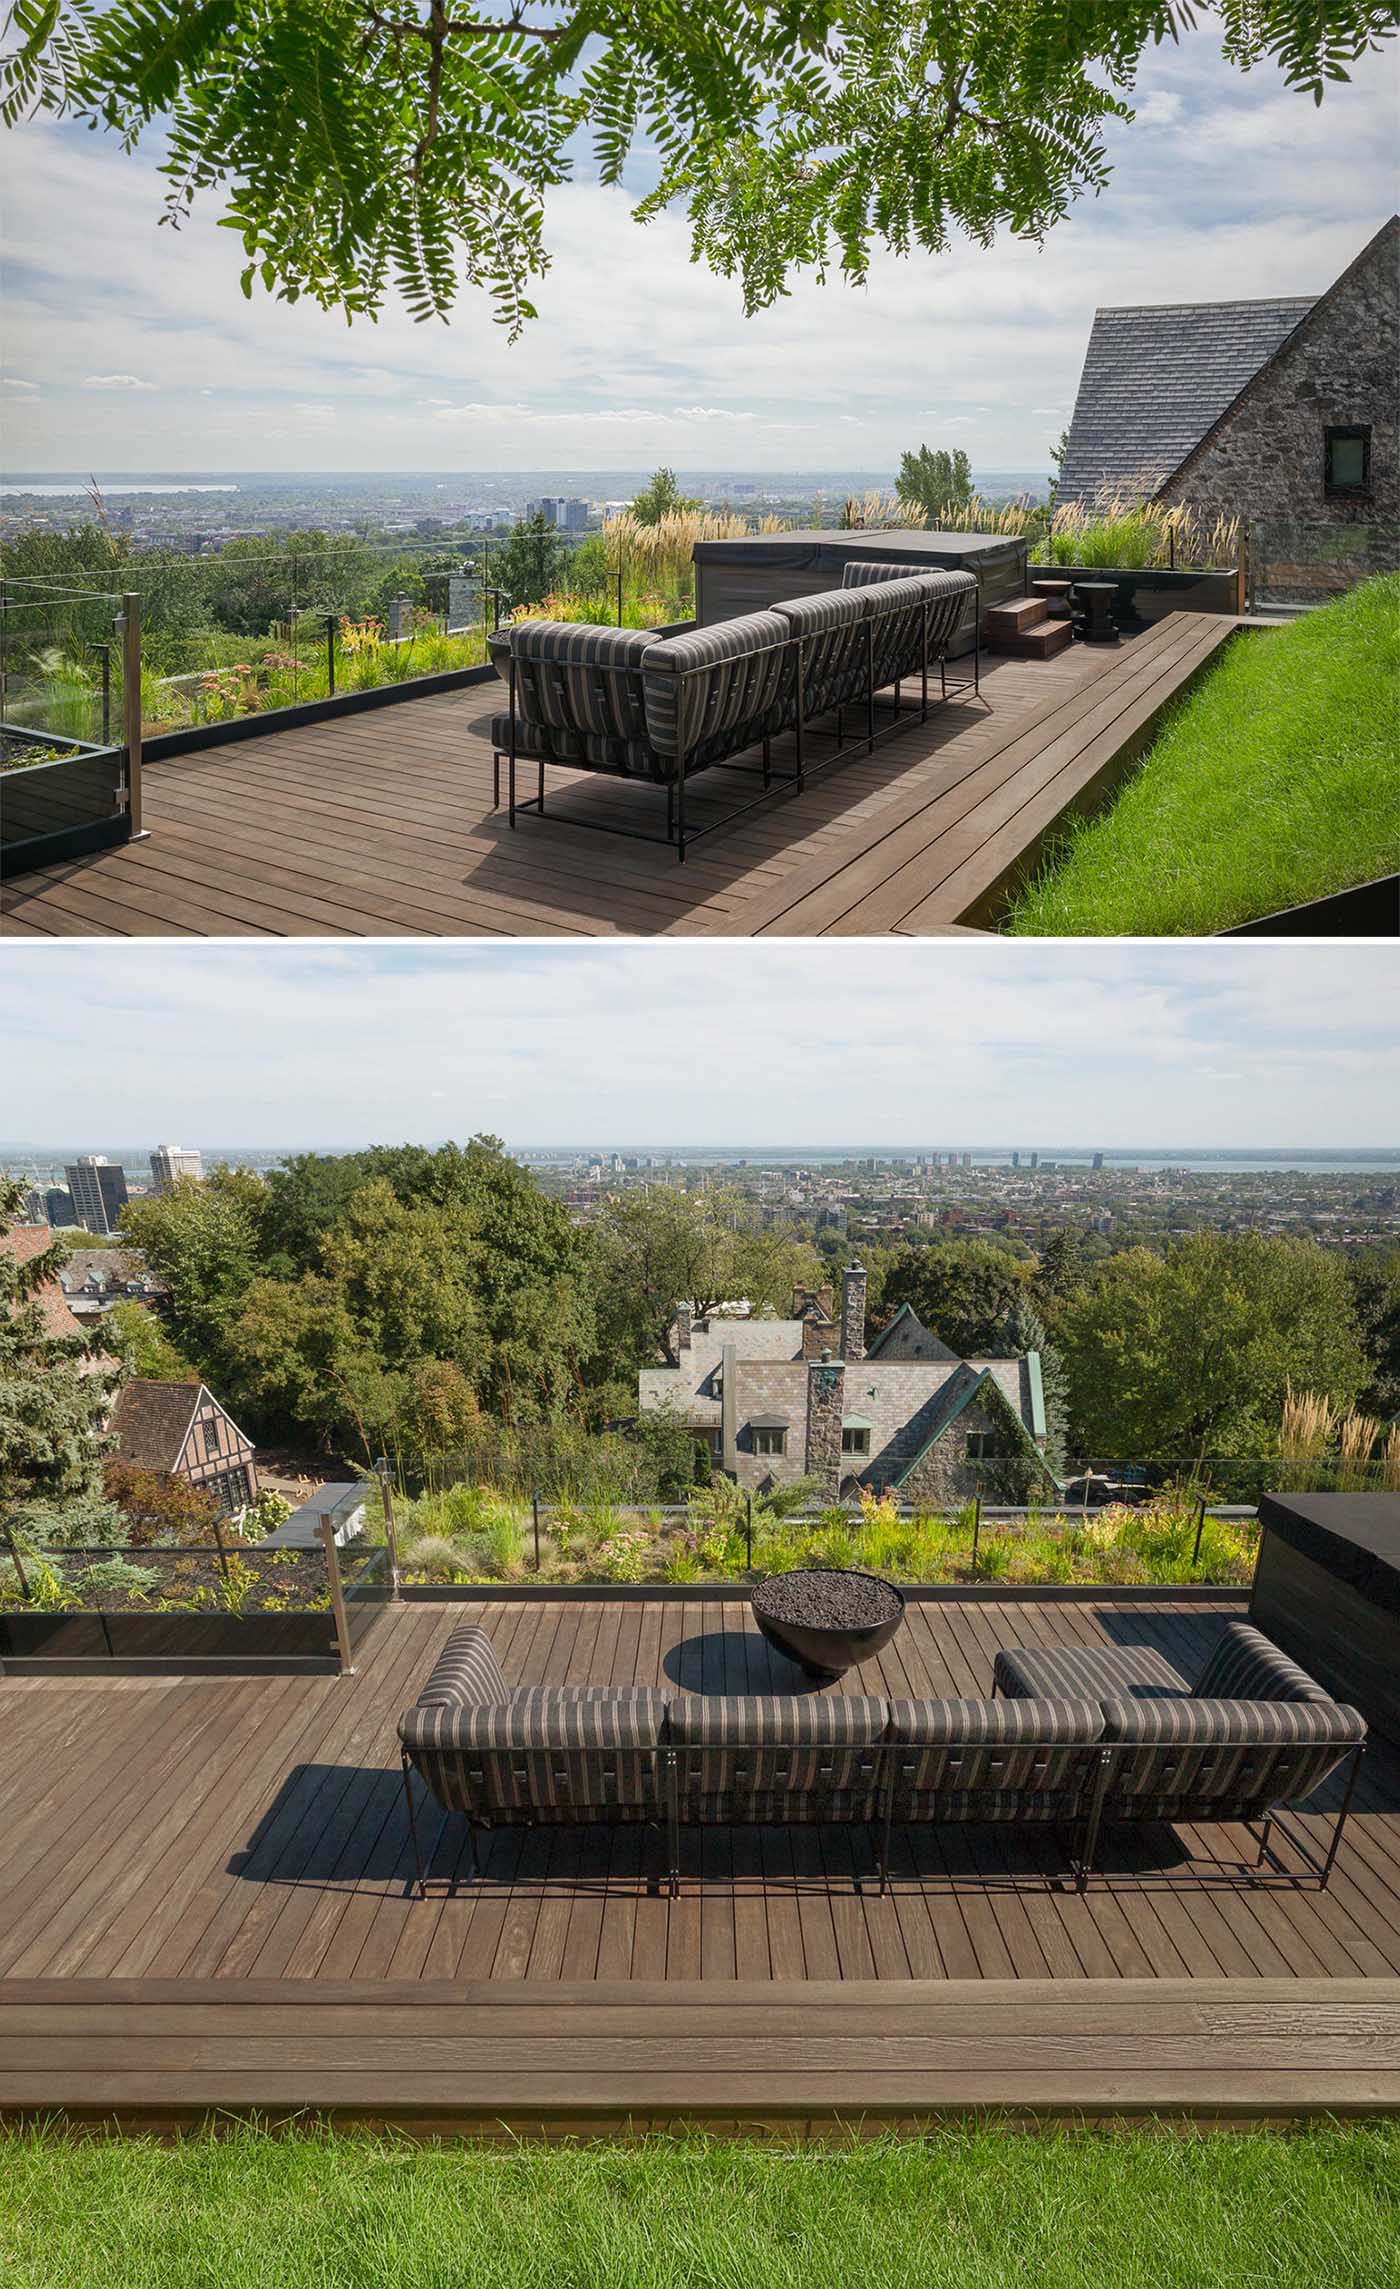 They Built A Rooftop Garden And Lounge Area On This Home To Enjoy The Views  Over Everything